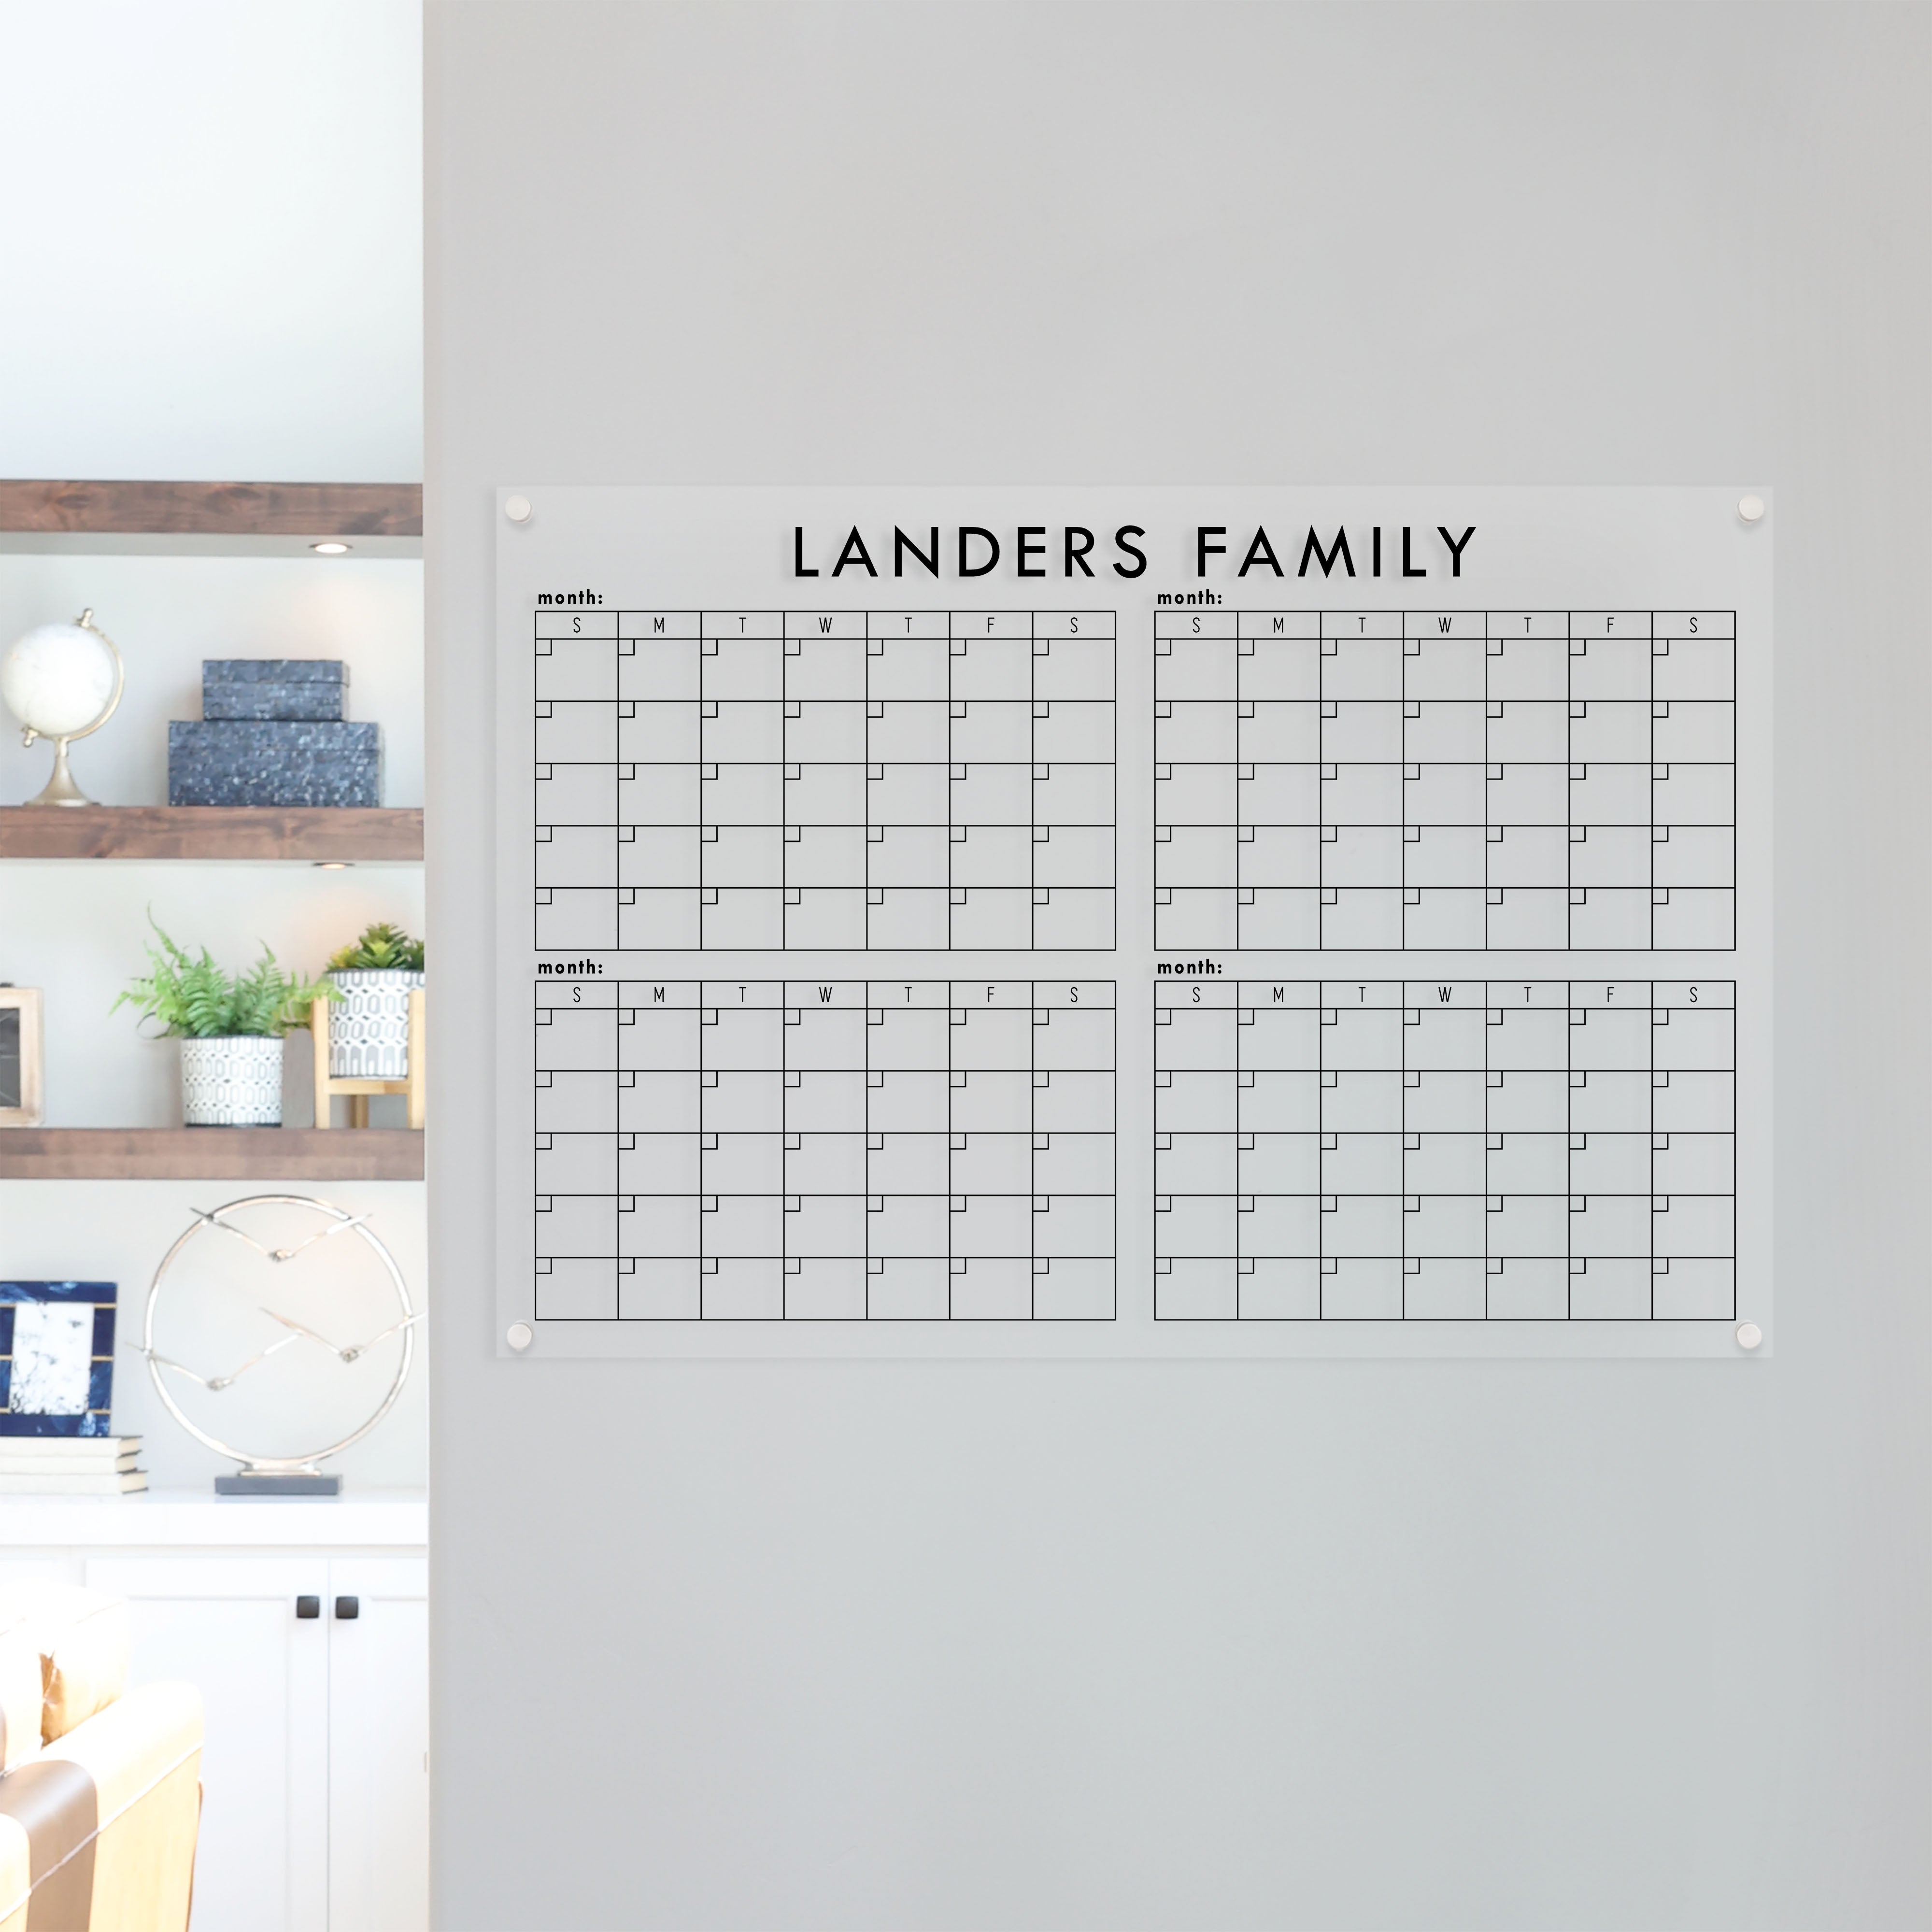 A dry-erase four month calendar made of acrylic hanging on the wall